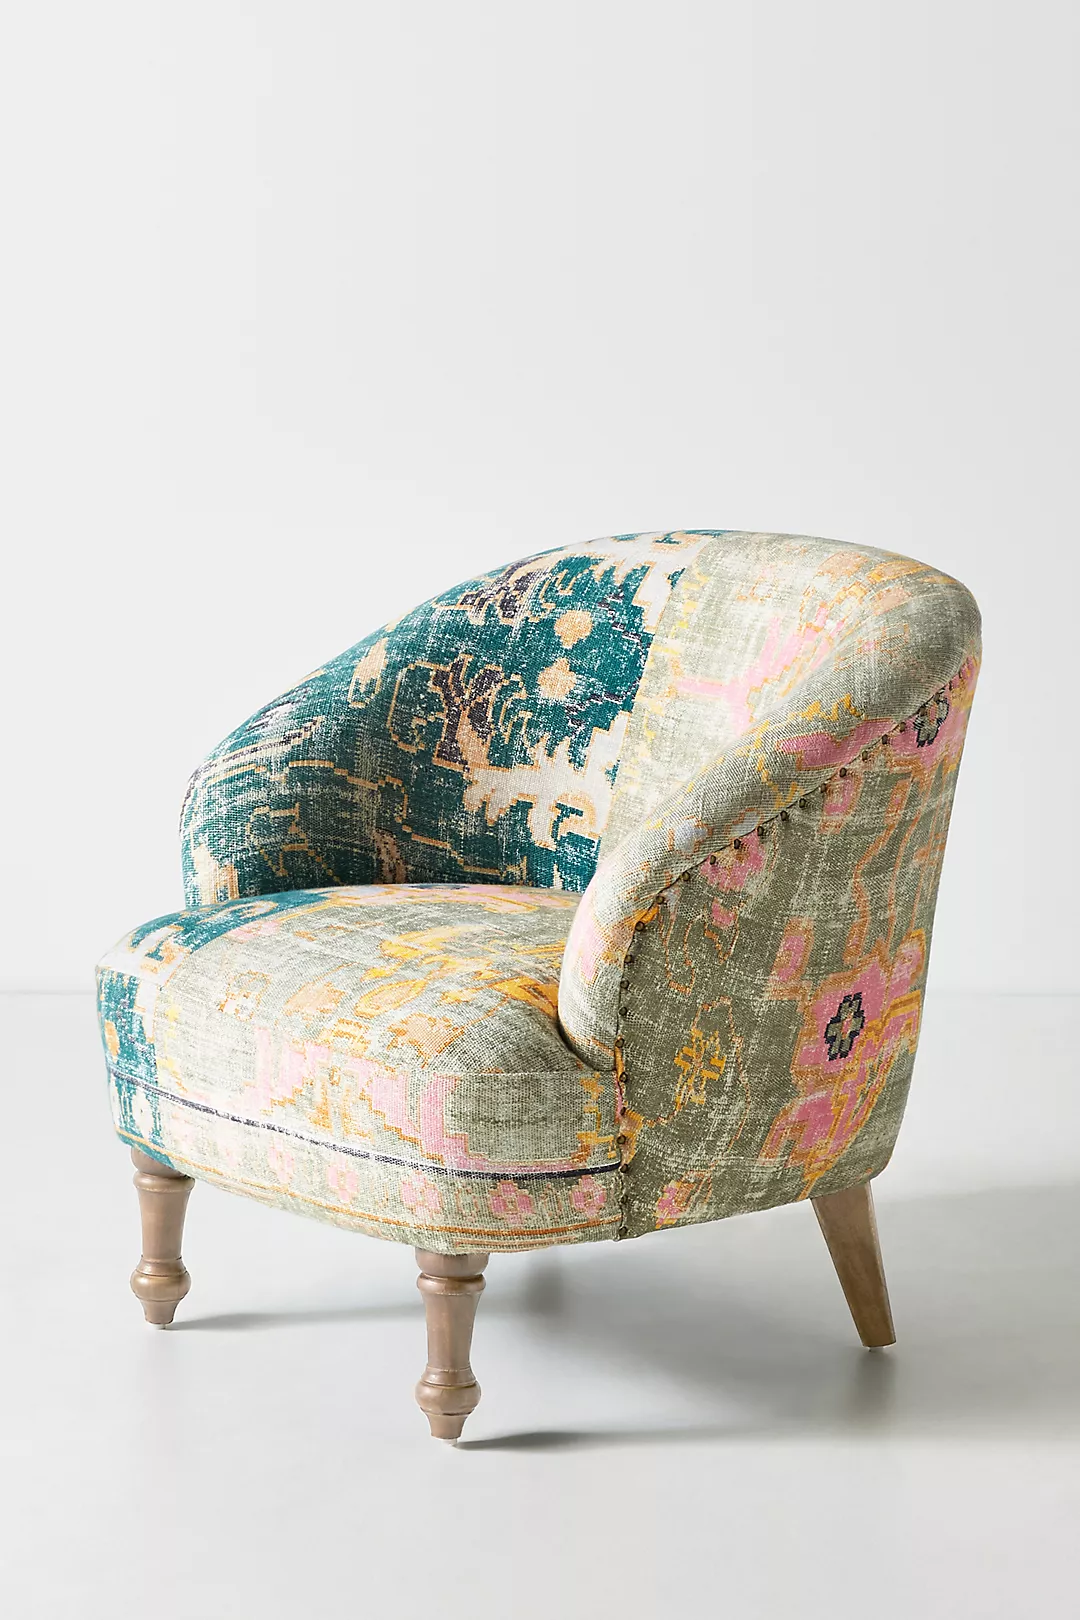 Small Patterned Chair